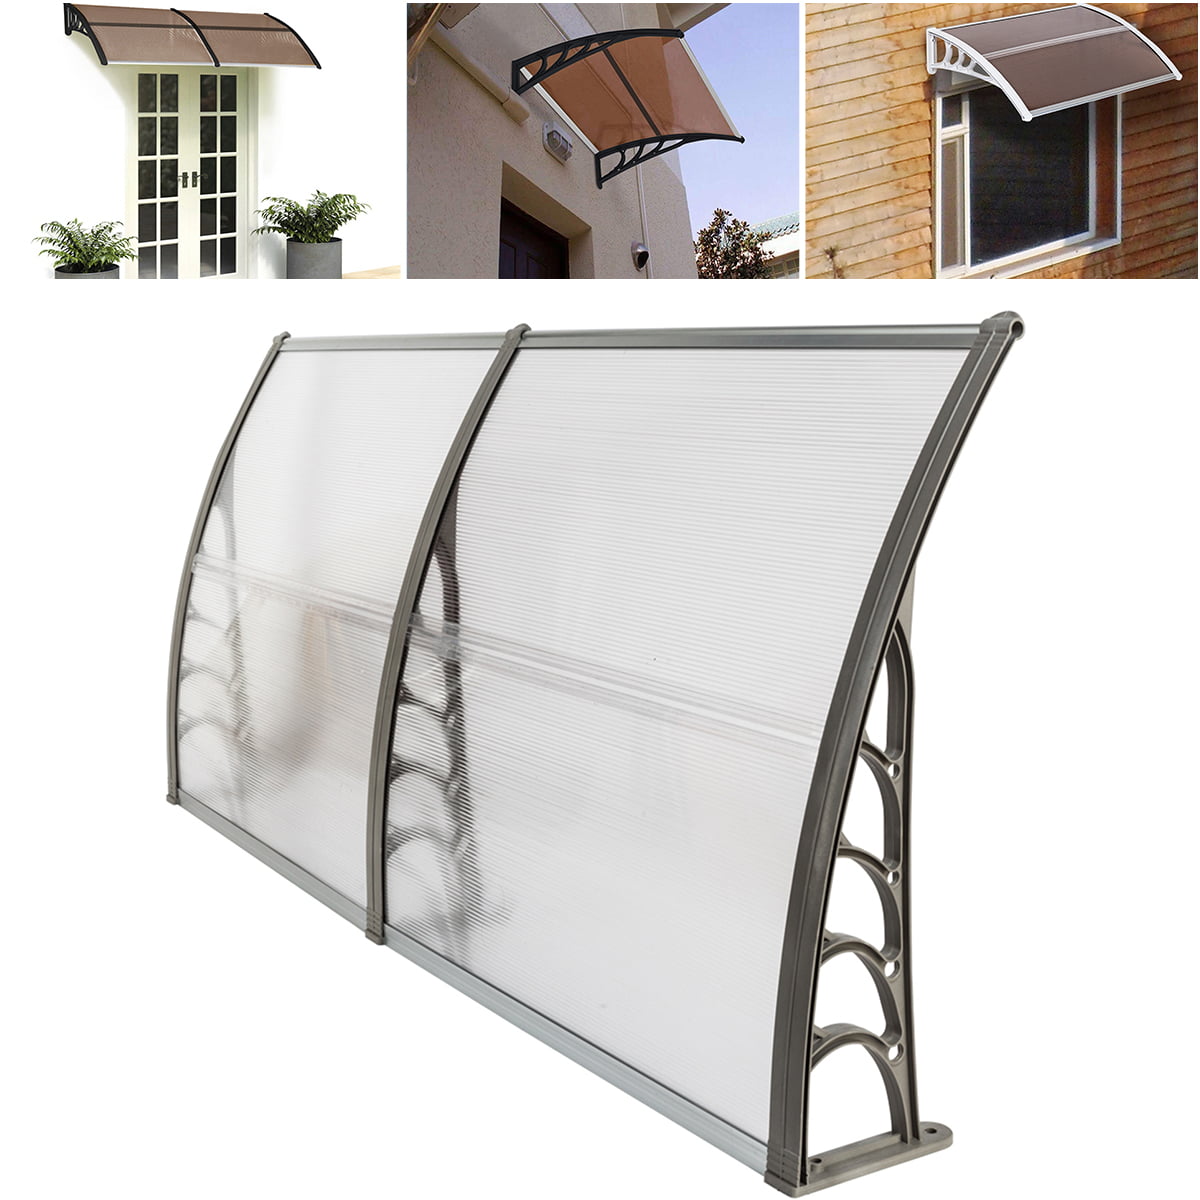 ALEKO Polycarbonate Outdoor Window Door Canopy Awning Cover 40 x 80 In Gray 